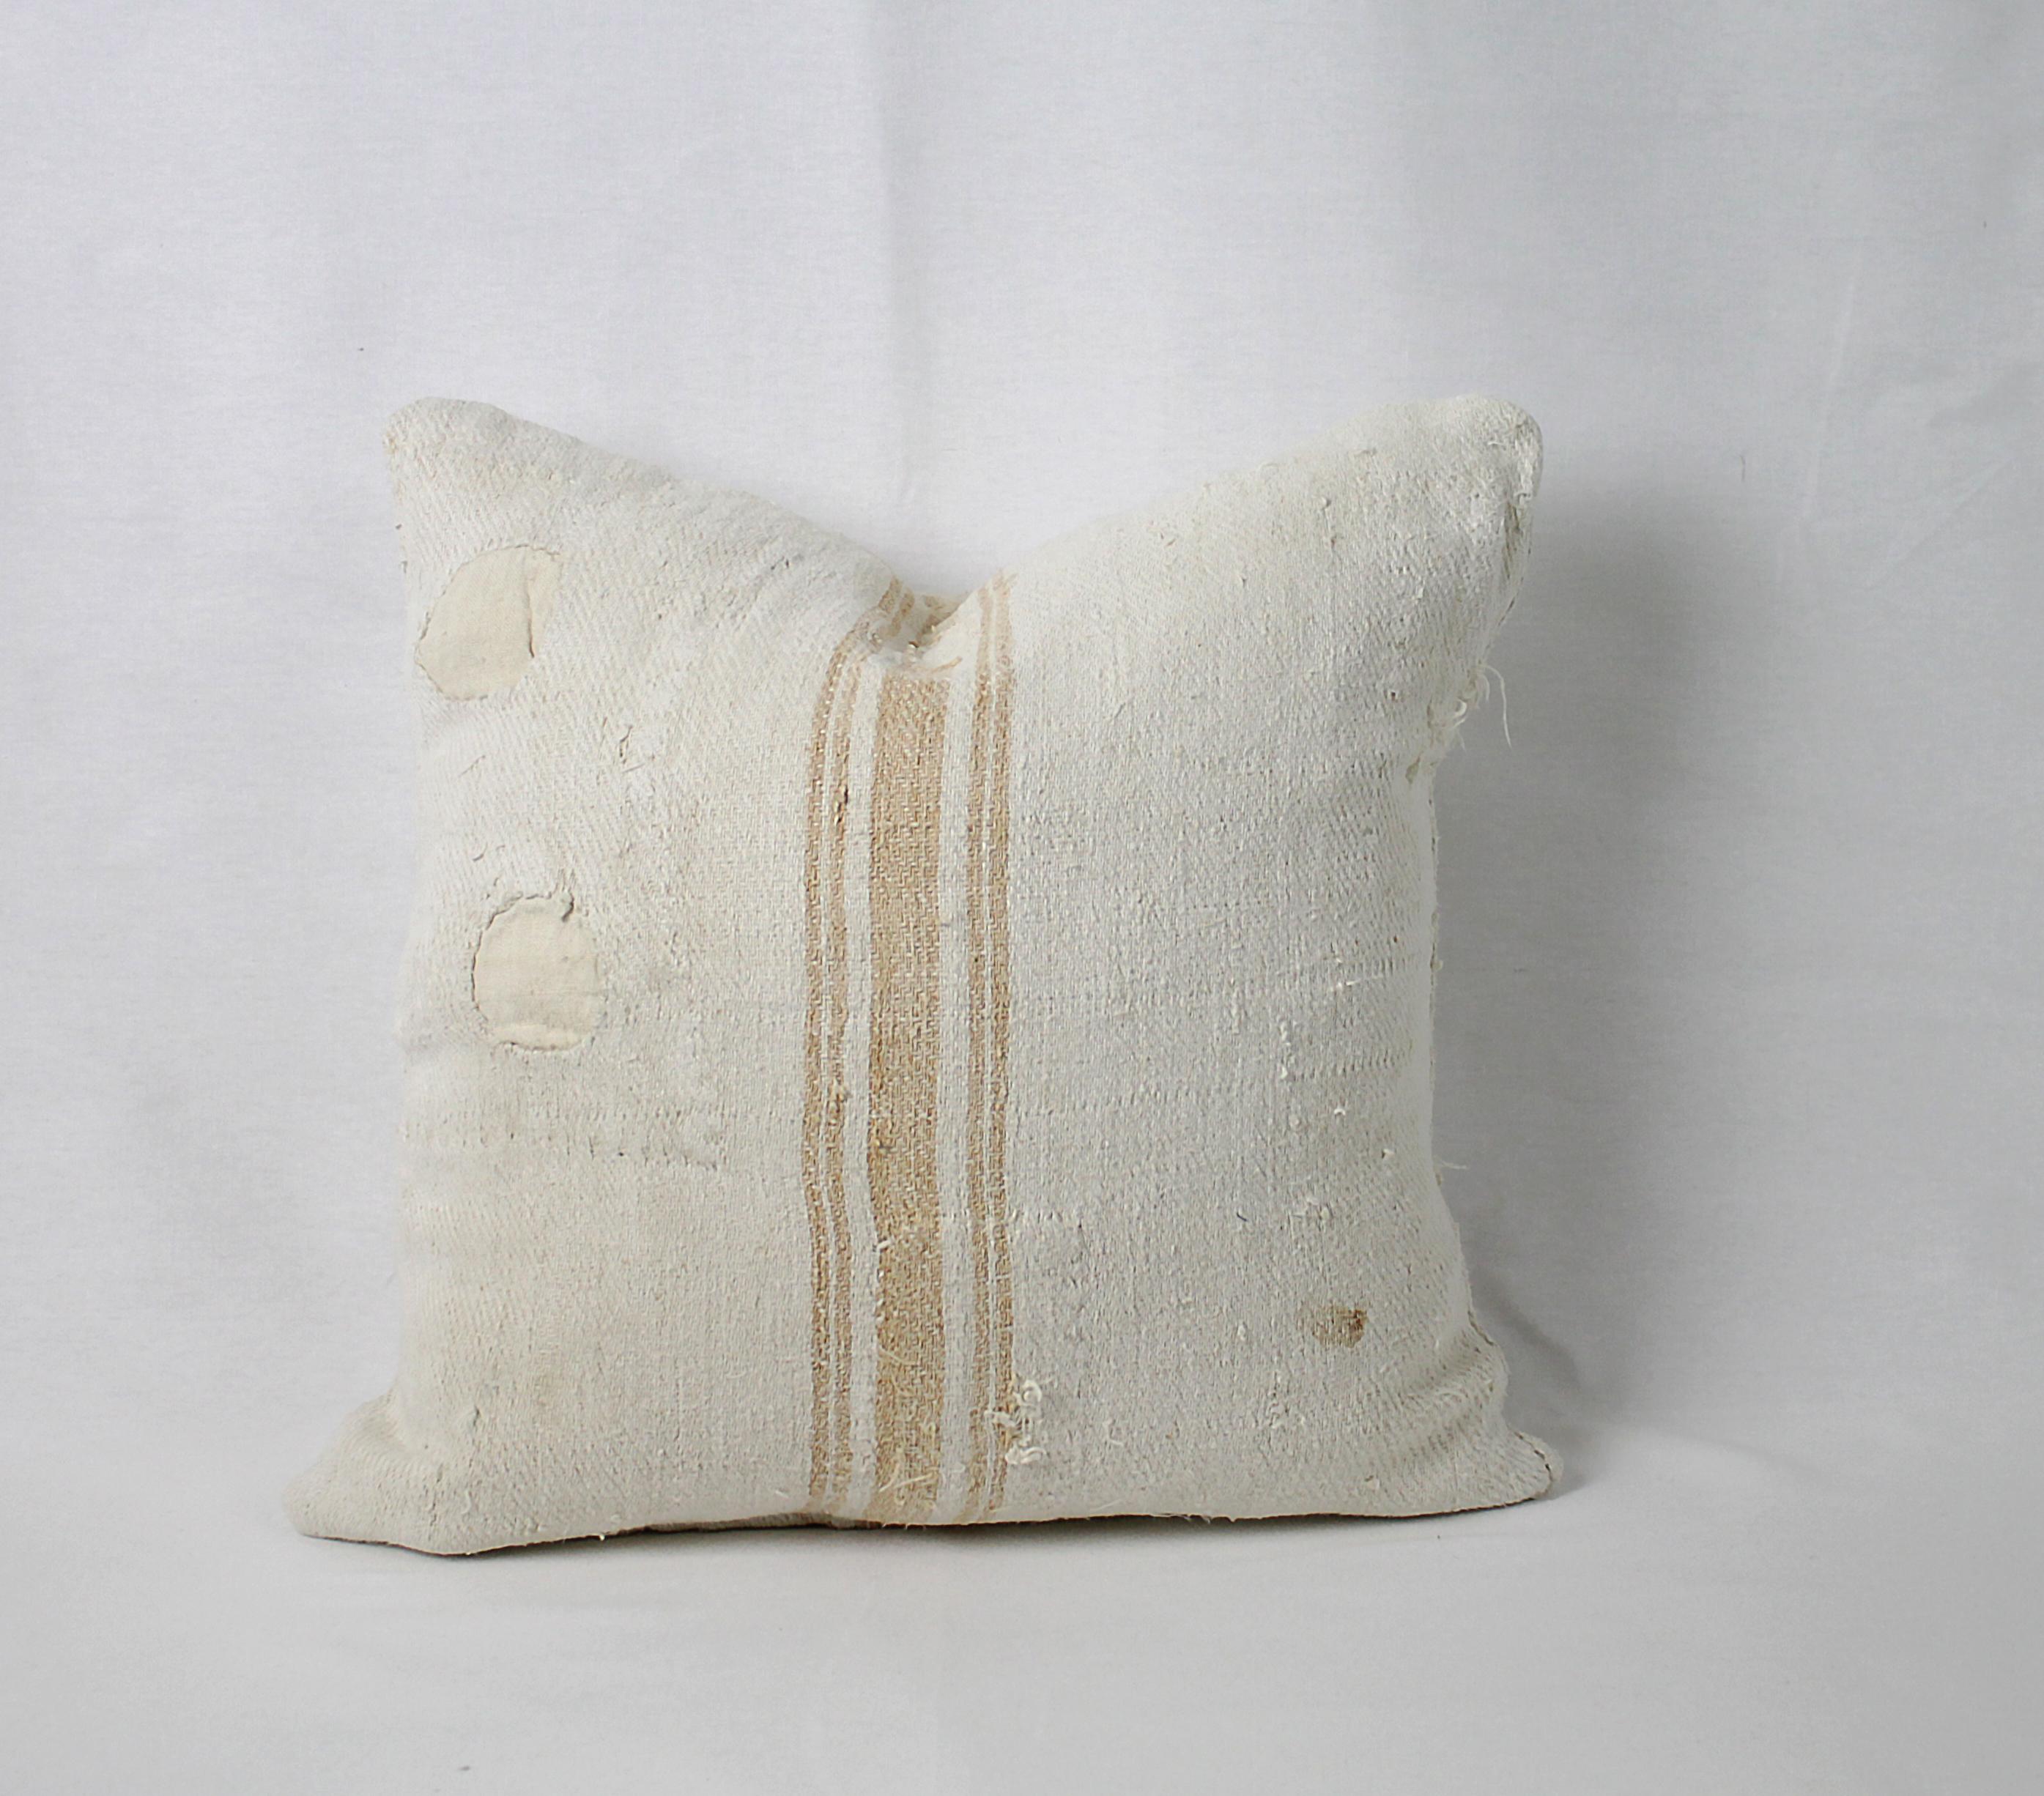 We make these pillows from old grain sacks from Eastern Europe. The pillow has a light orange triple stripe down the center, and the body is a medium oatmeal color. They are sewn with a zipper closure, and since we prewash all our vintage fabrics in